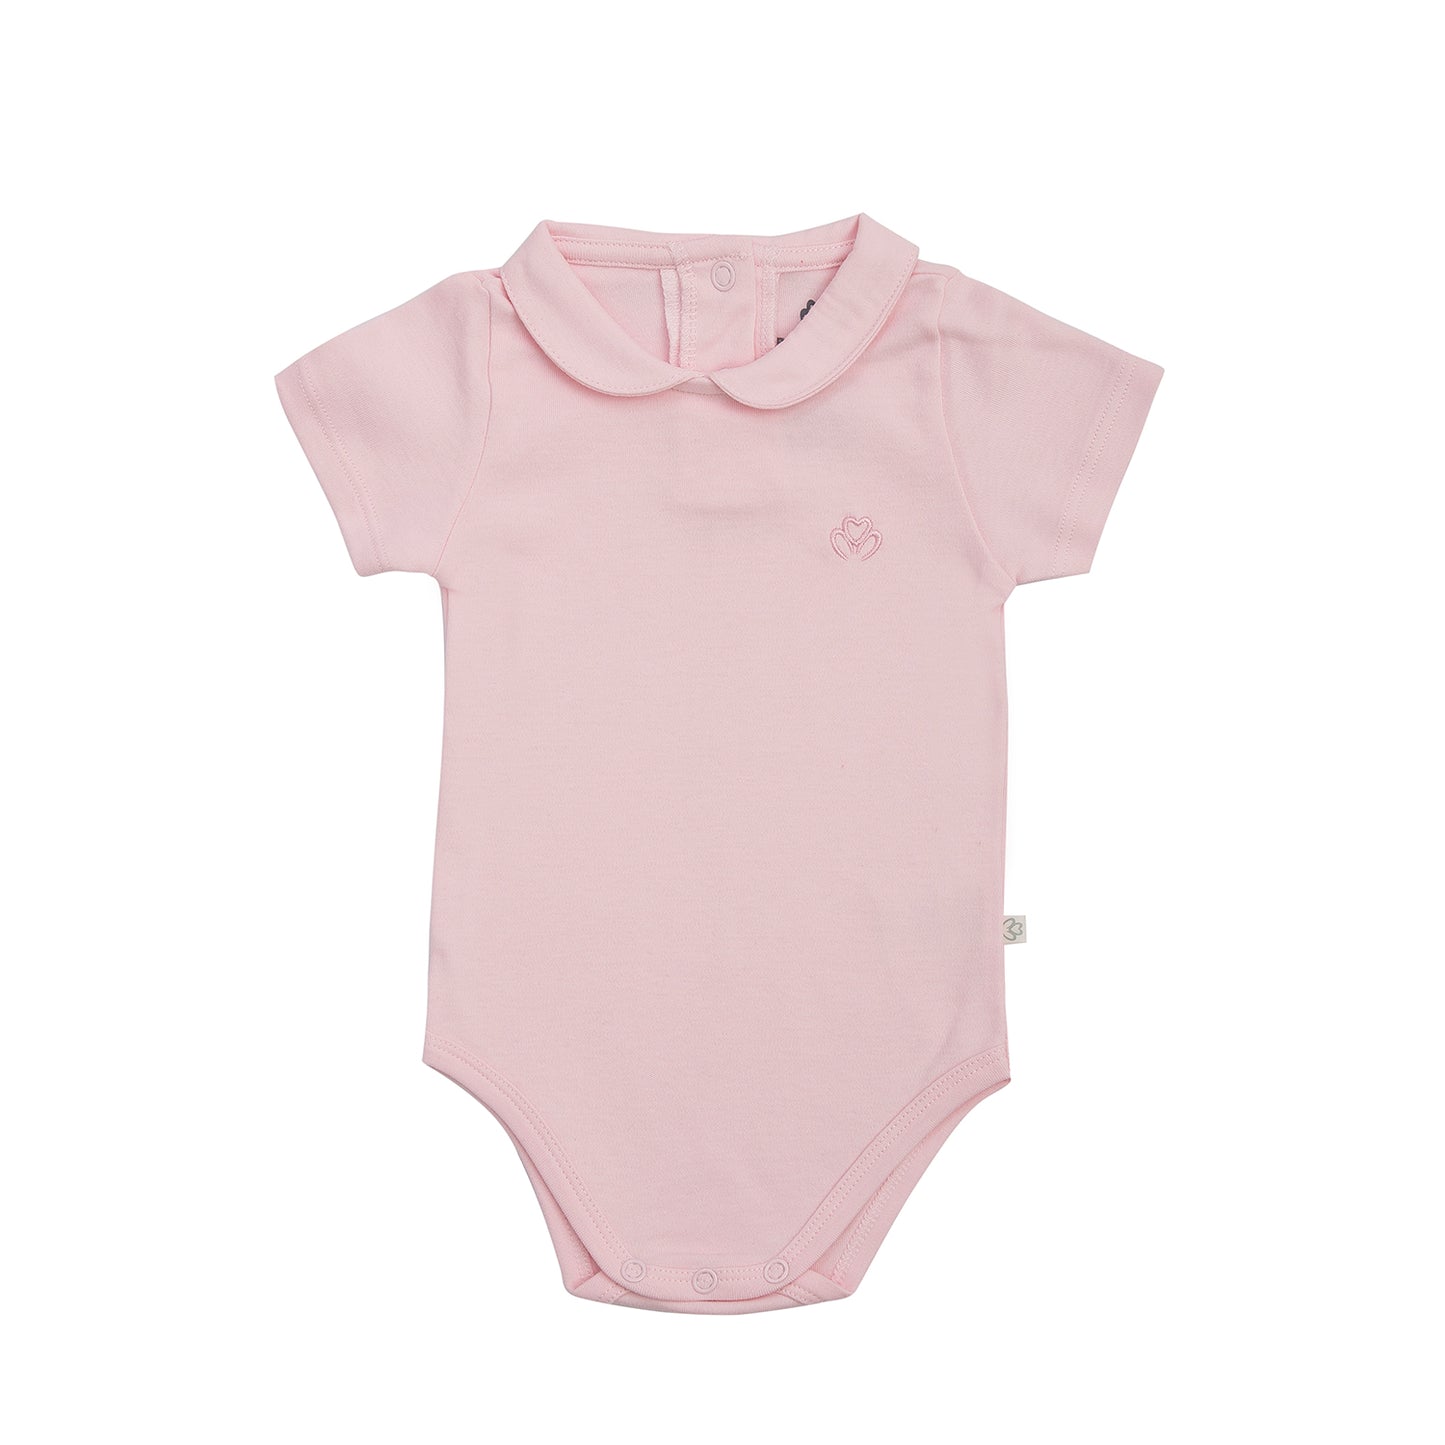 Organic Polo collar bodysuit for baby girls Aged 0-24 Months colored Pink